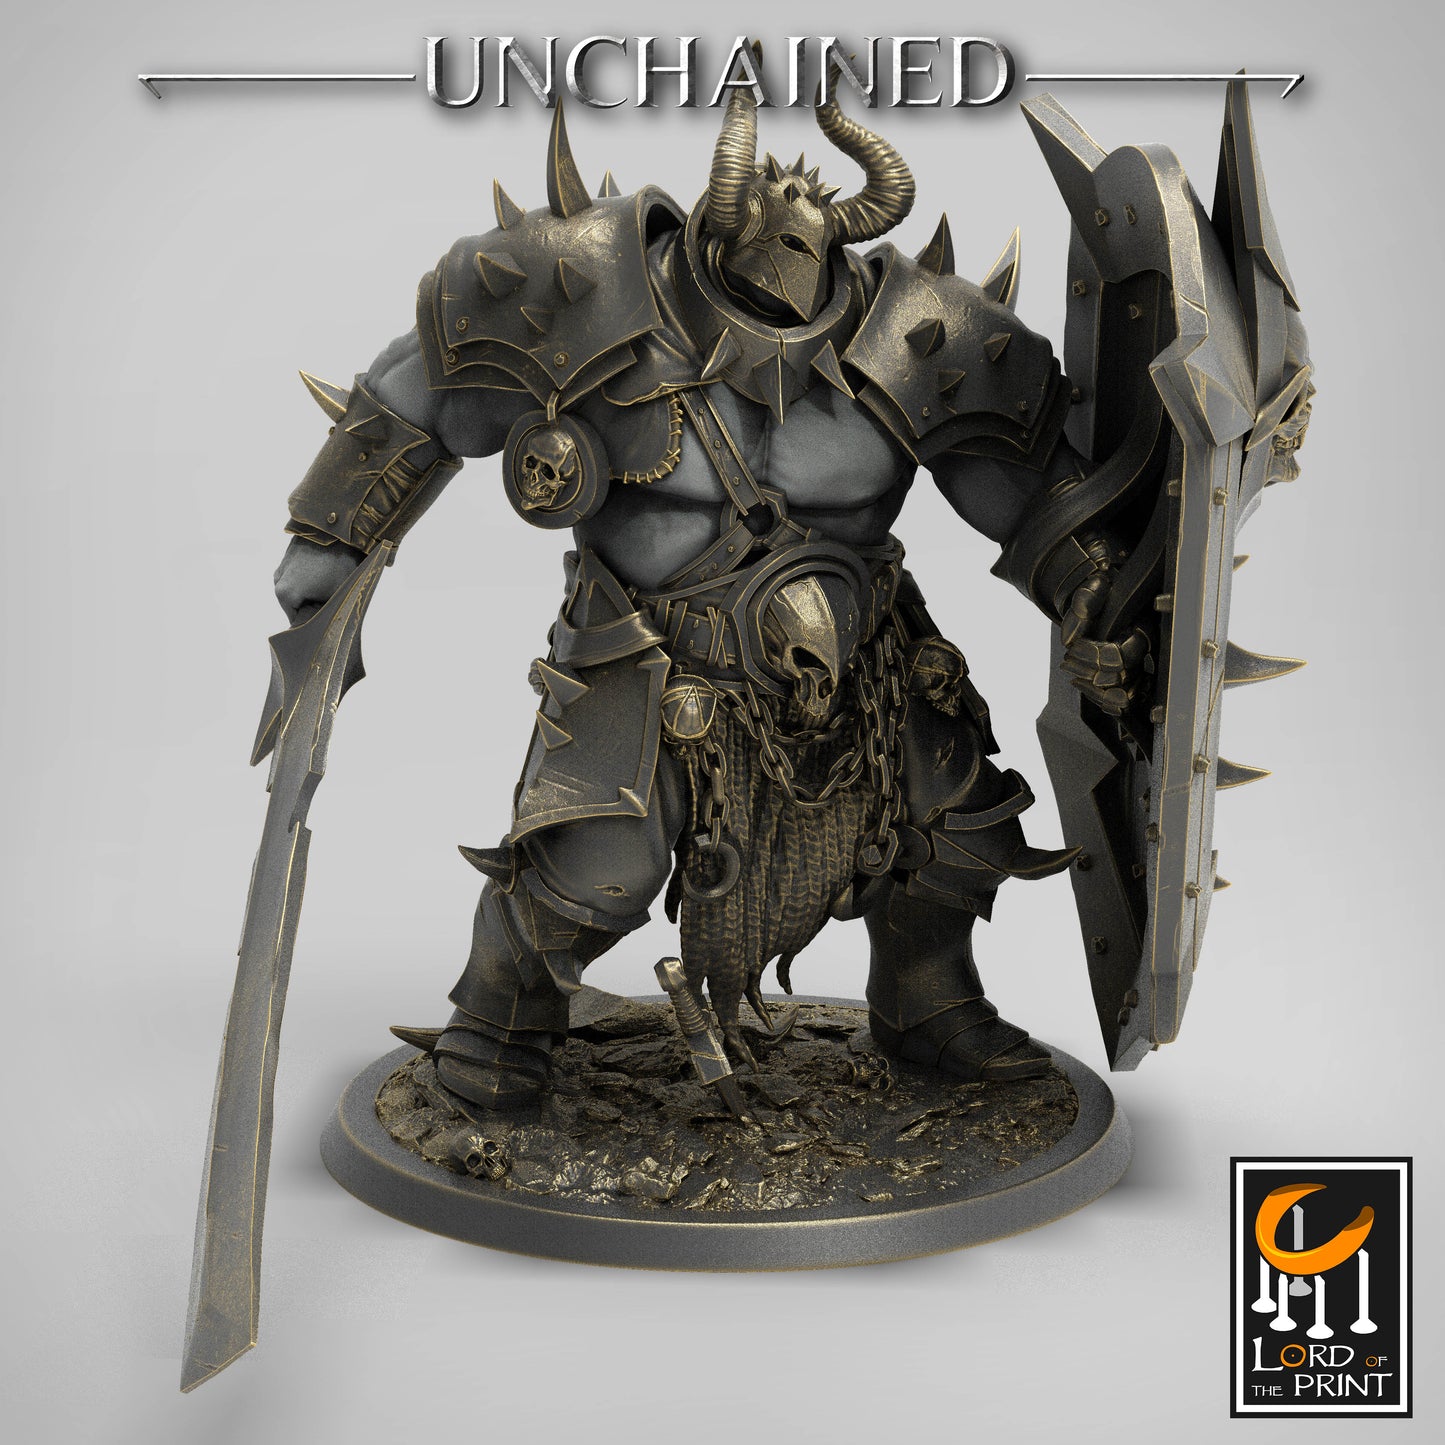 Heavy Soldiers - Sword - UNCHAINED ARMY